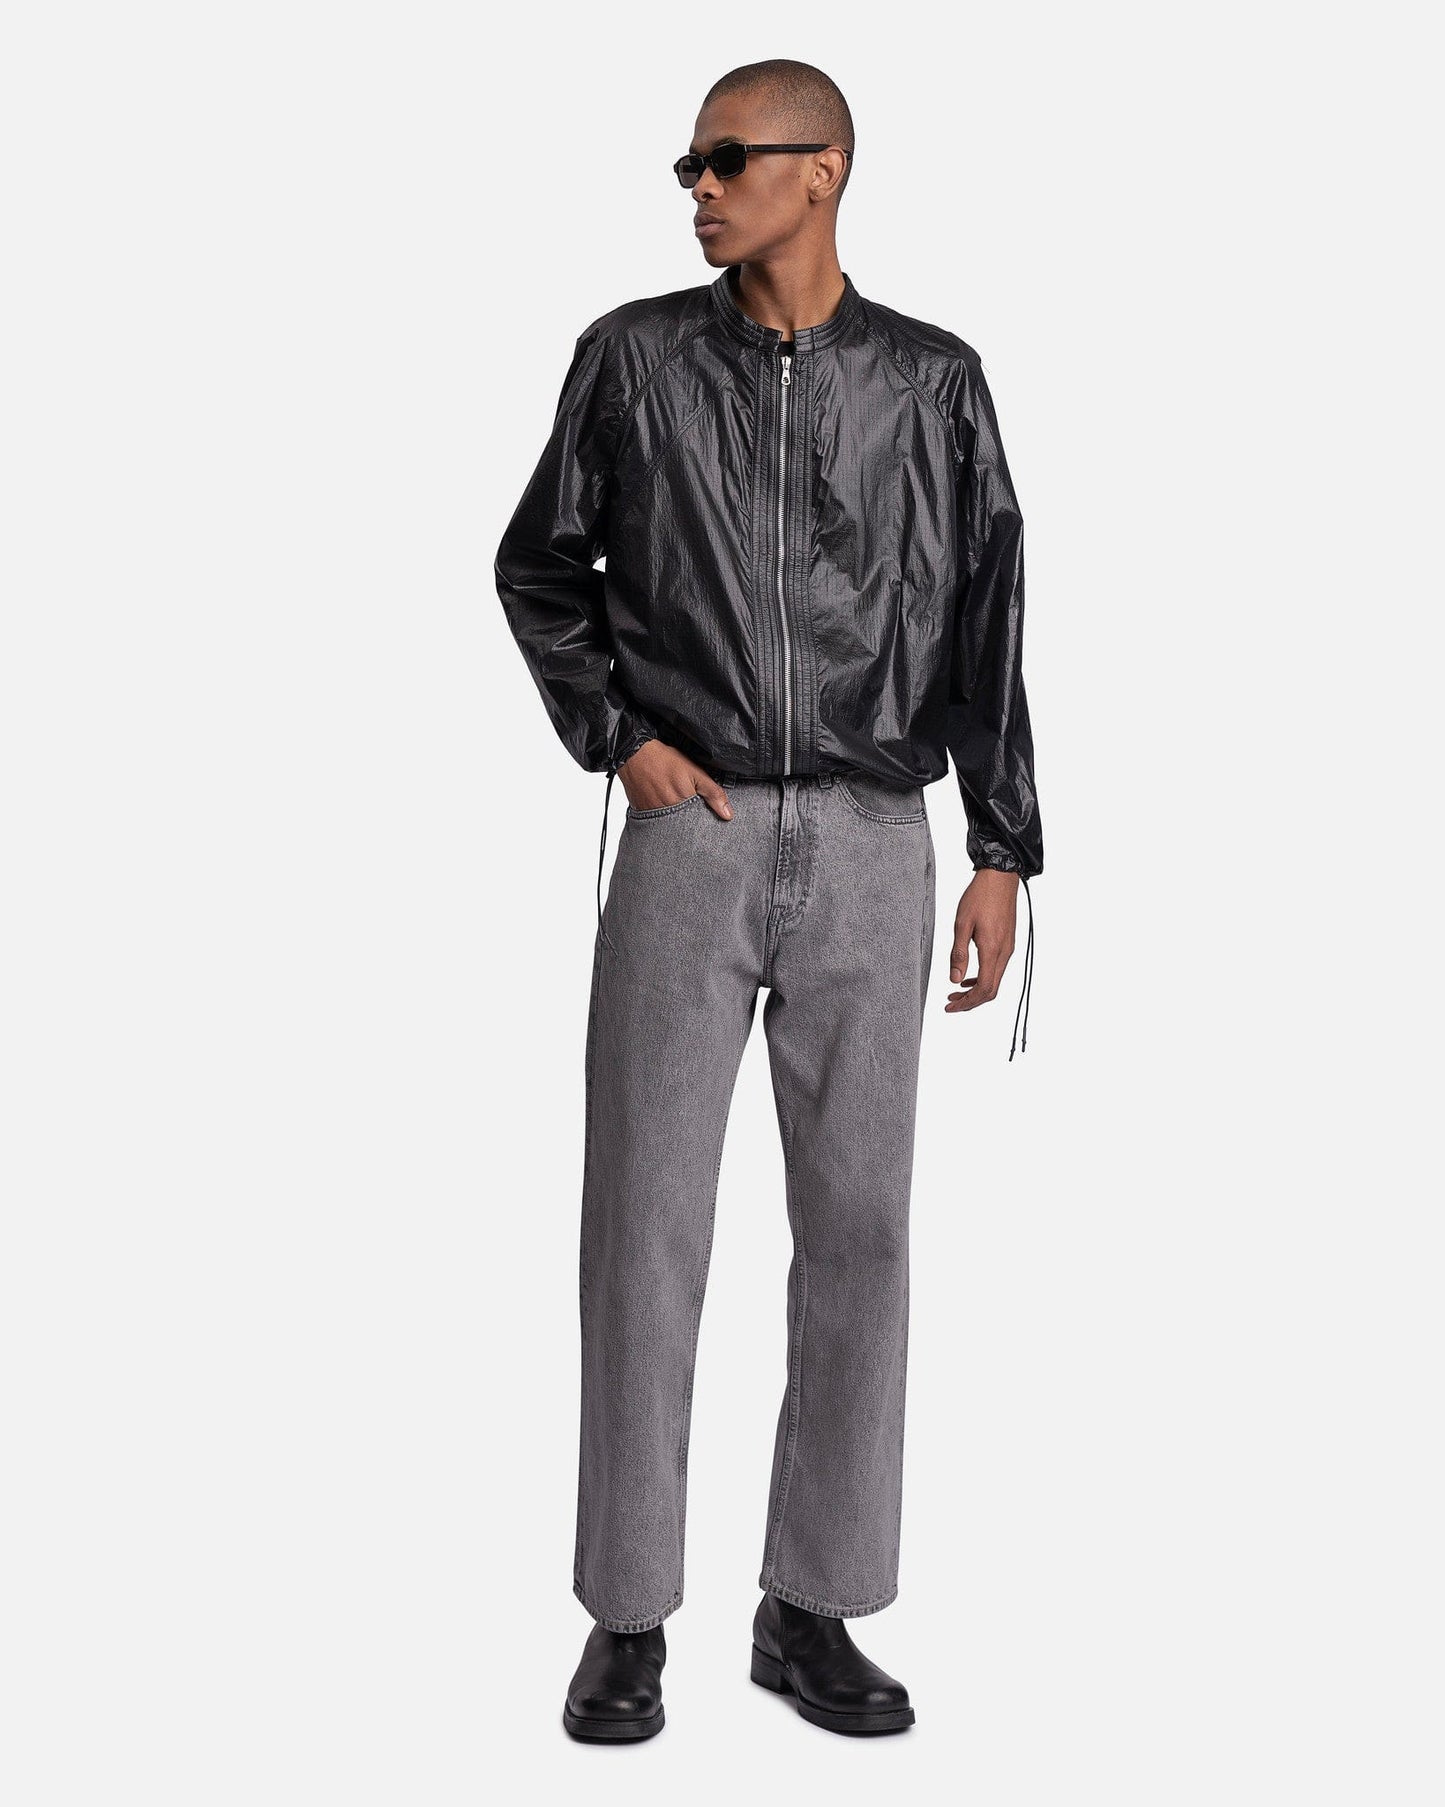 Our Legacy Men's Jackets Parasail Jacket in Black Tech Chintz Ripstop